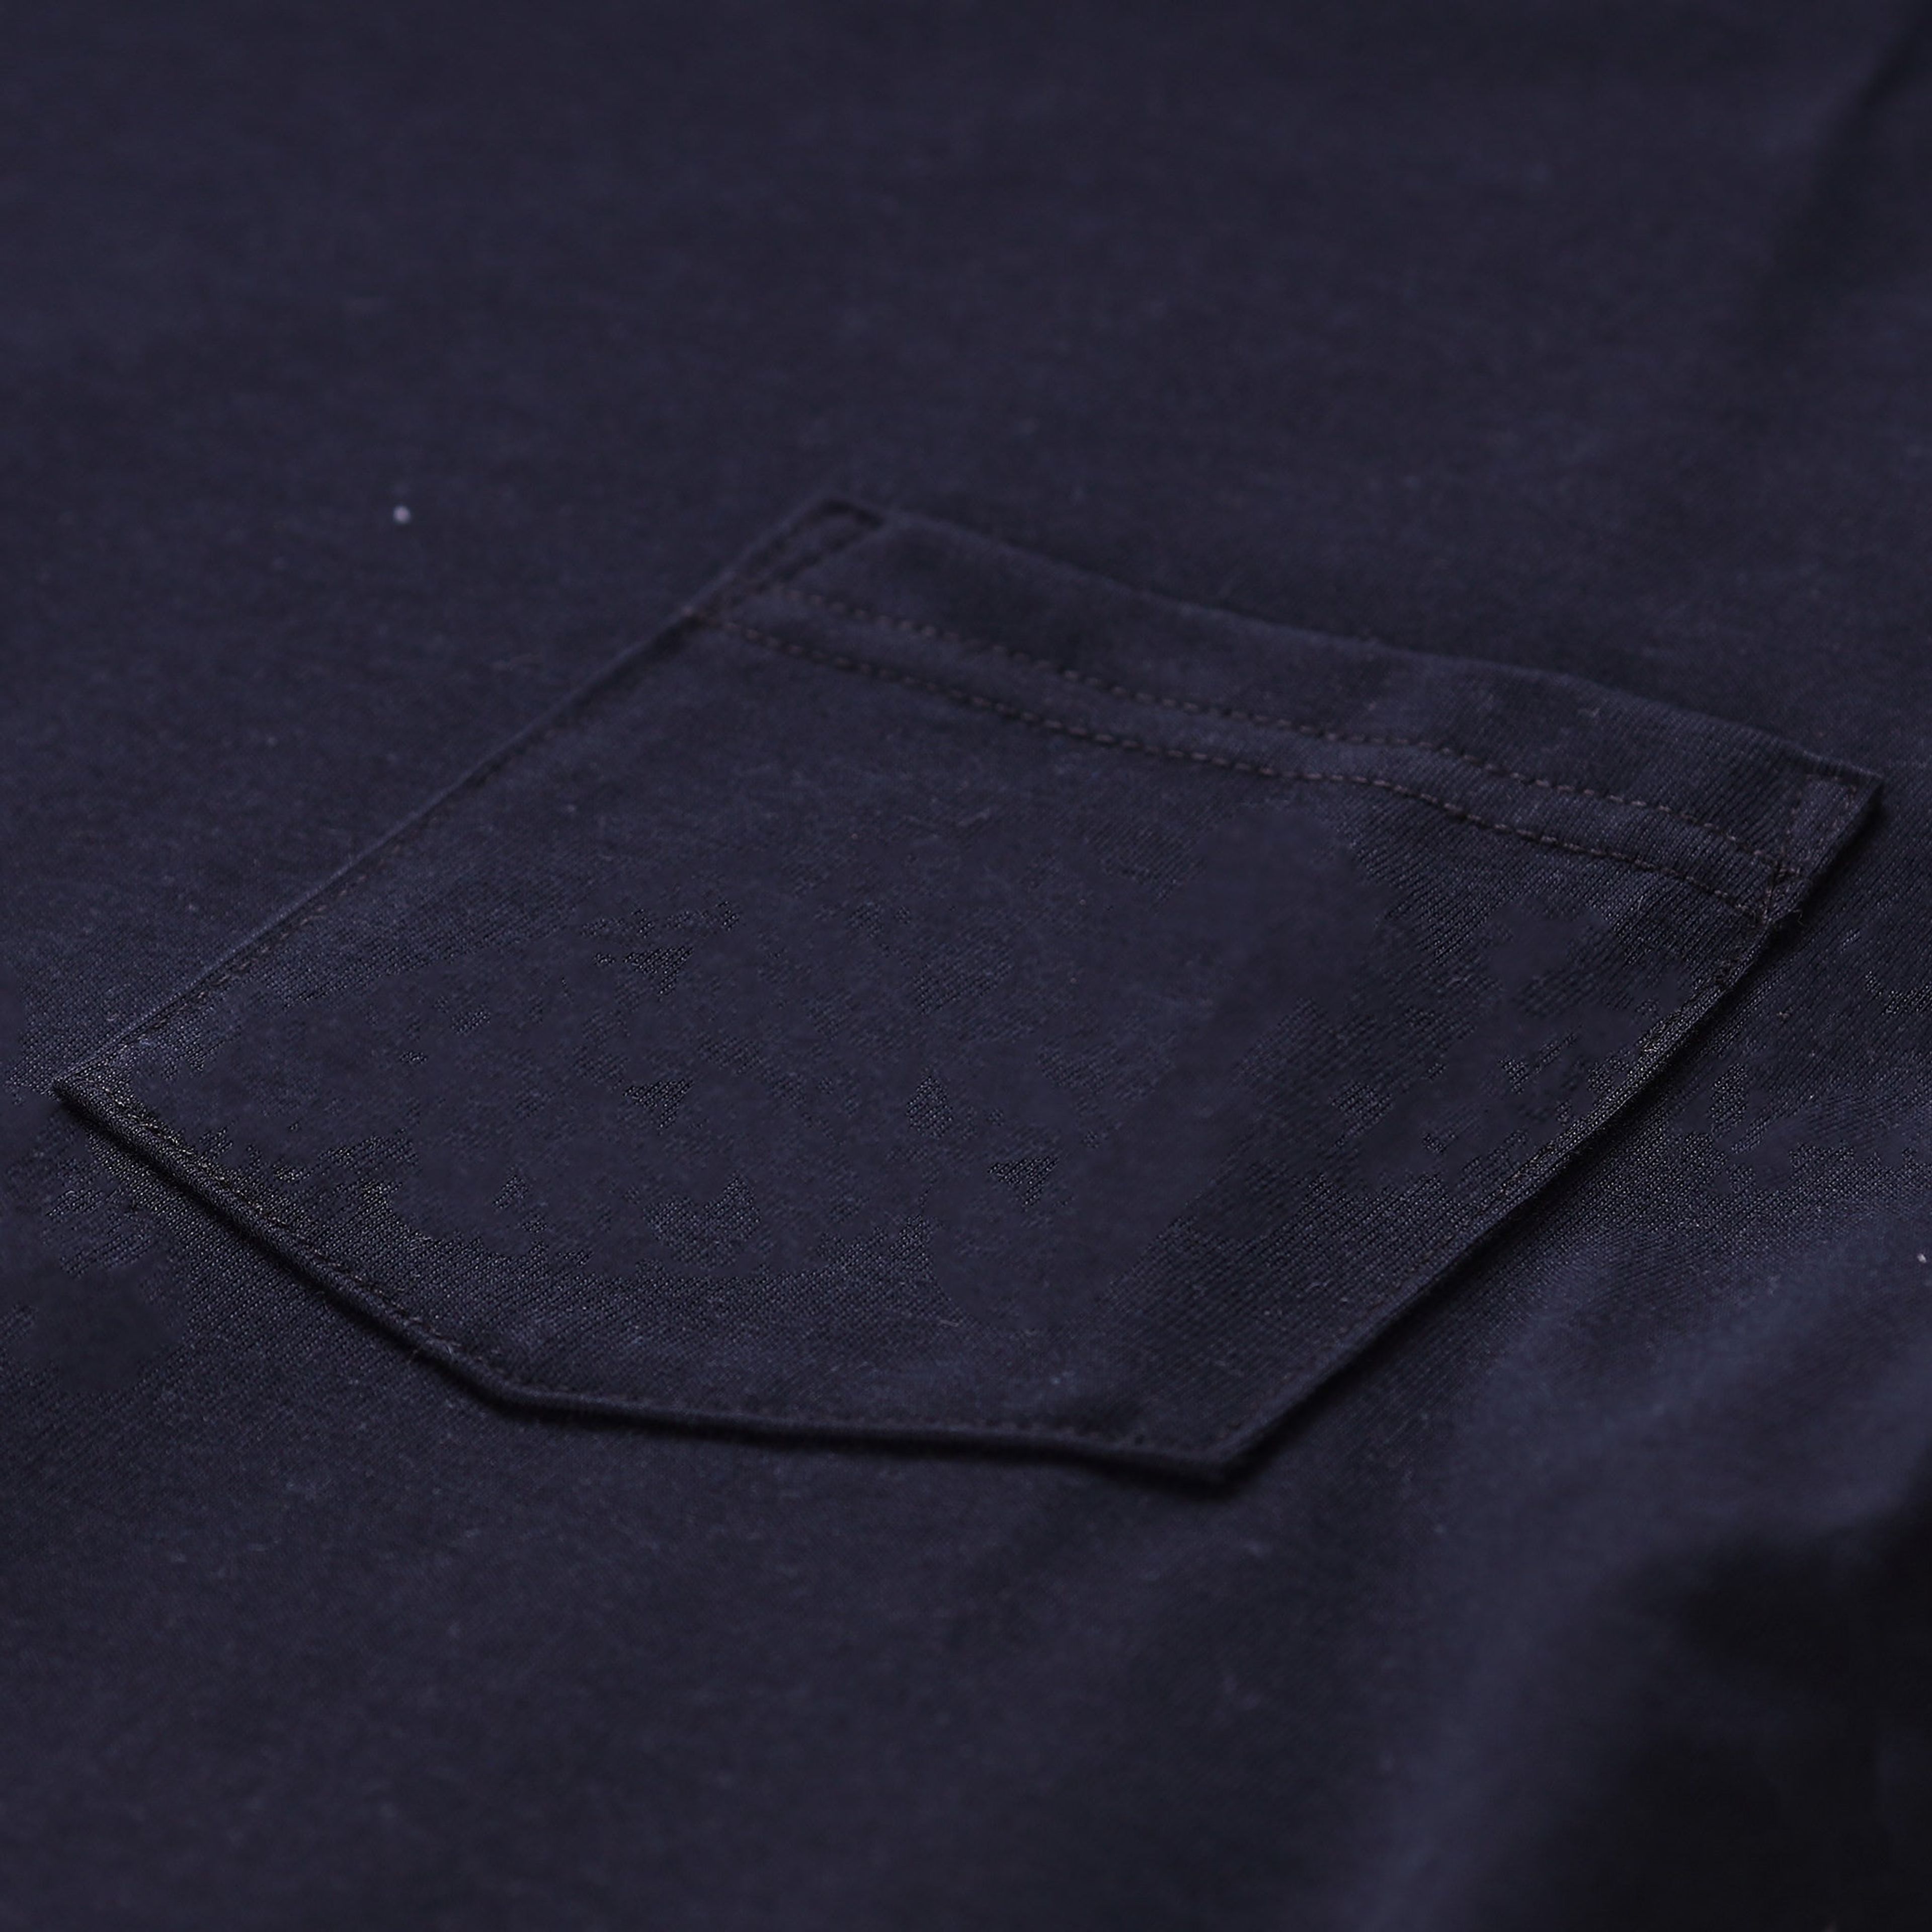 Everyday Long Sleeve Tee with Pocket in Black